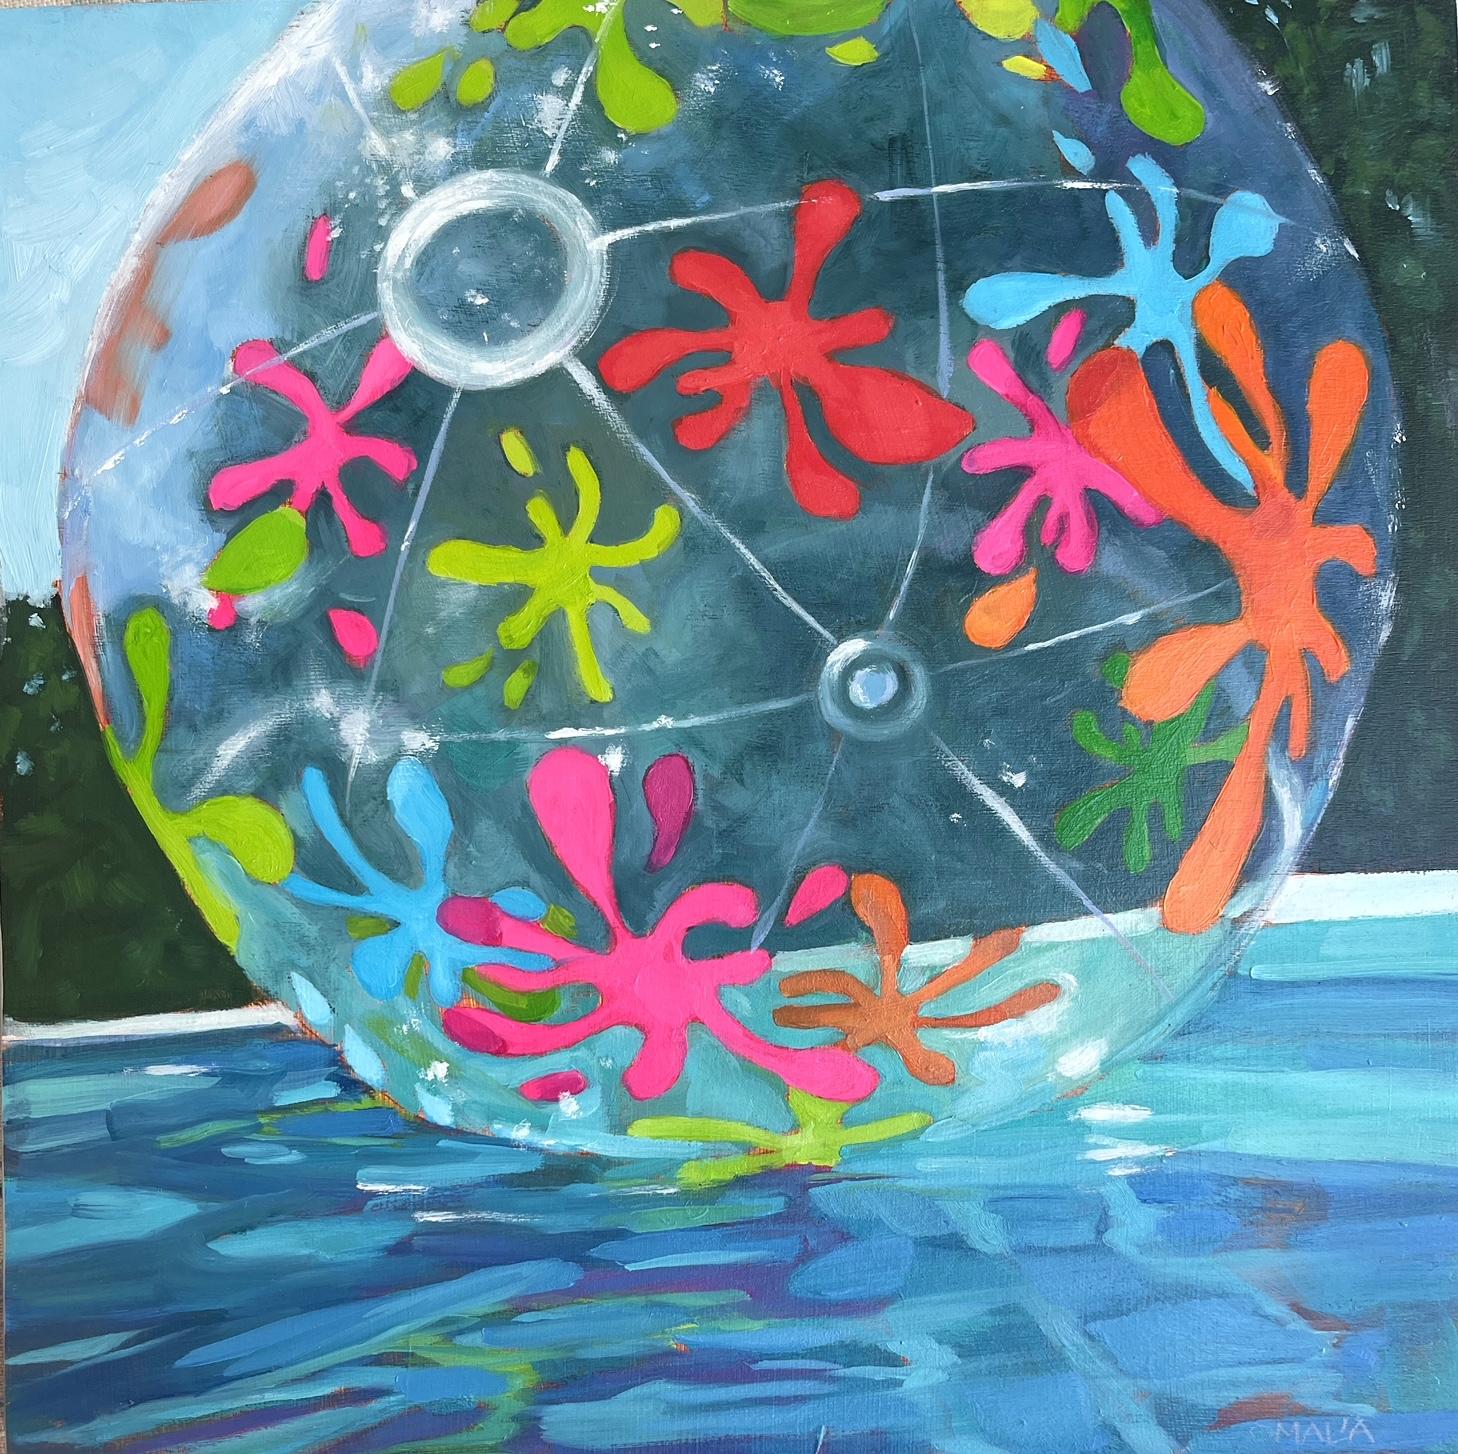 Carol O'Malia Still-Life Painting - "On a Day Like This" oil painting of clear beach ball with colorful splatter 